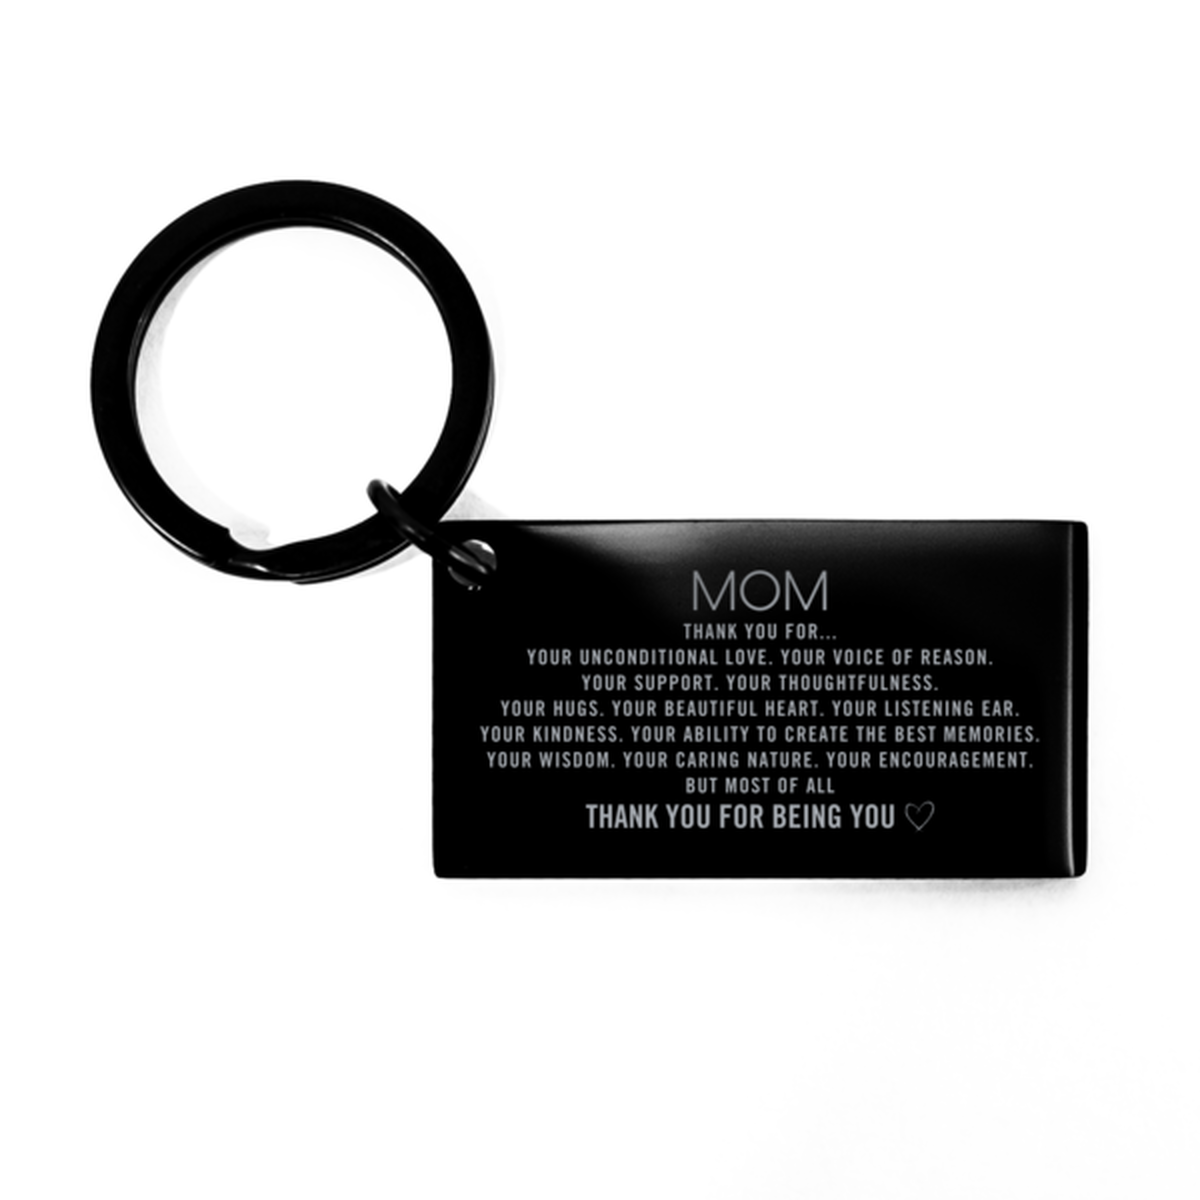 Mom Keychain Custom, Engraved Gifts For Mom Christmas Graduation Birthday Gifts for Men Women Mom Thank you for Your unconditional love